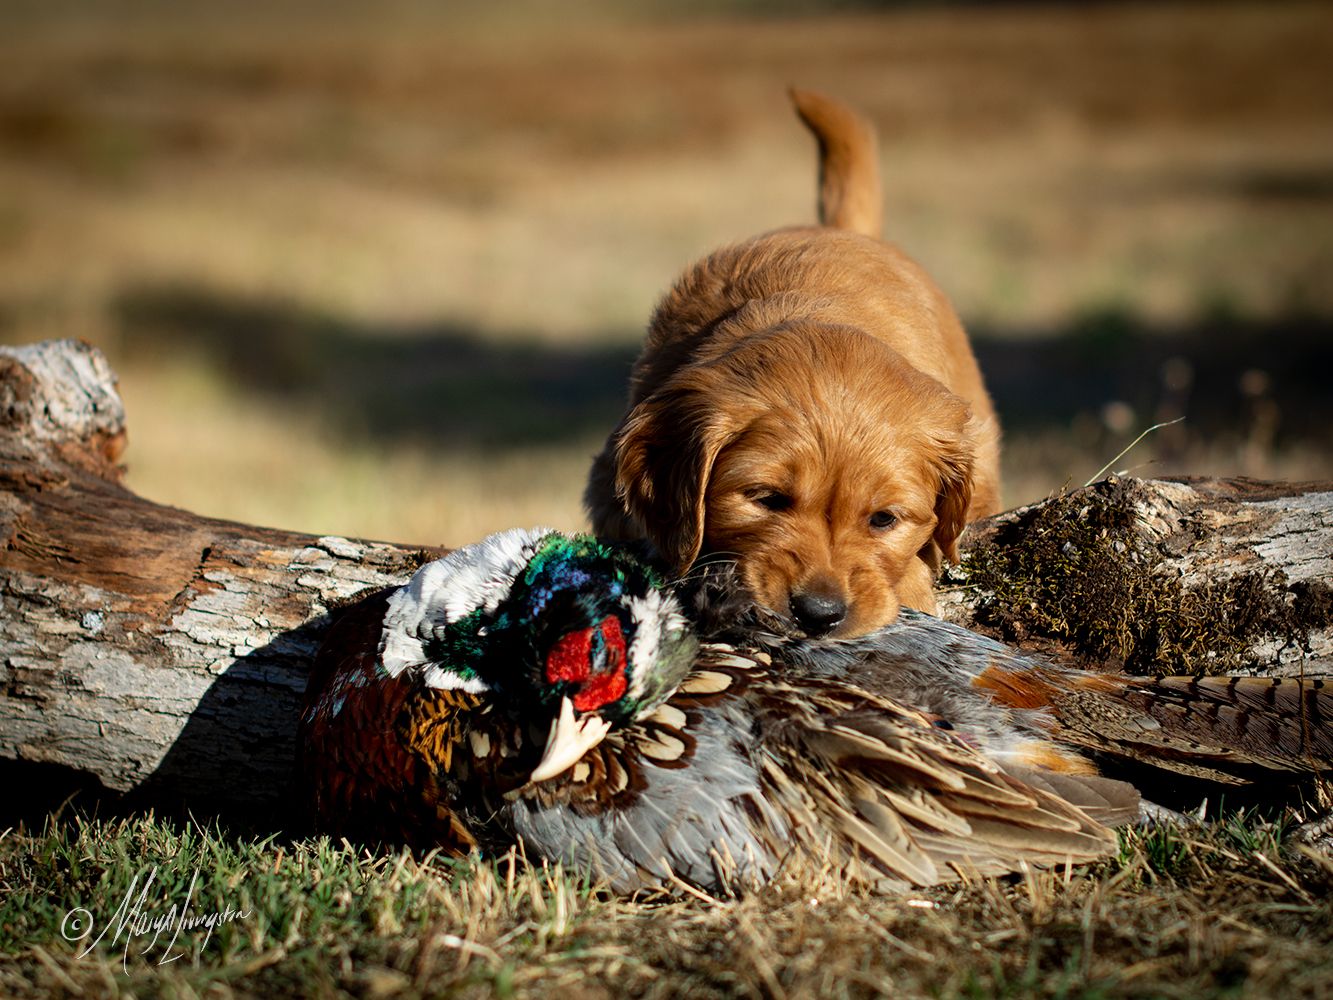 Puppy with pheasant.